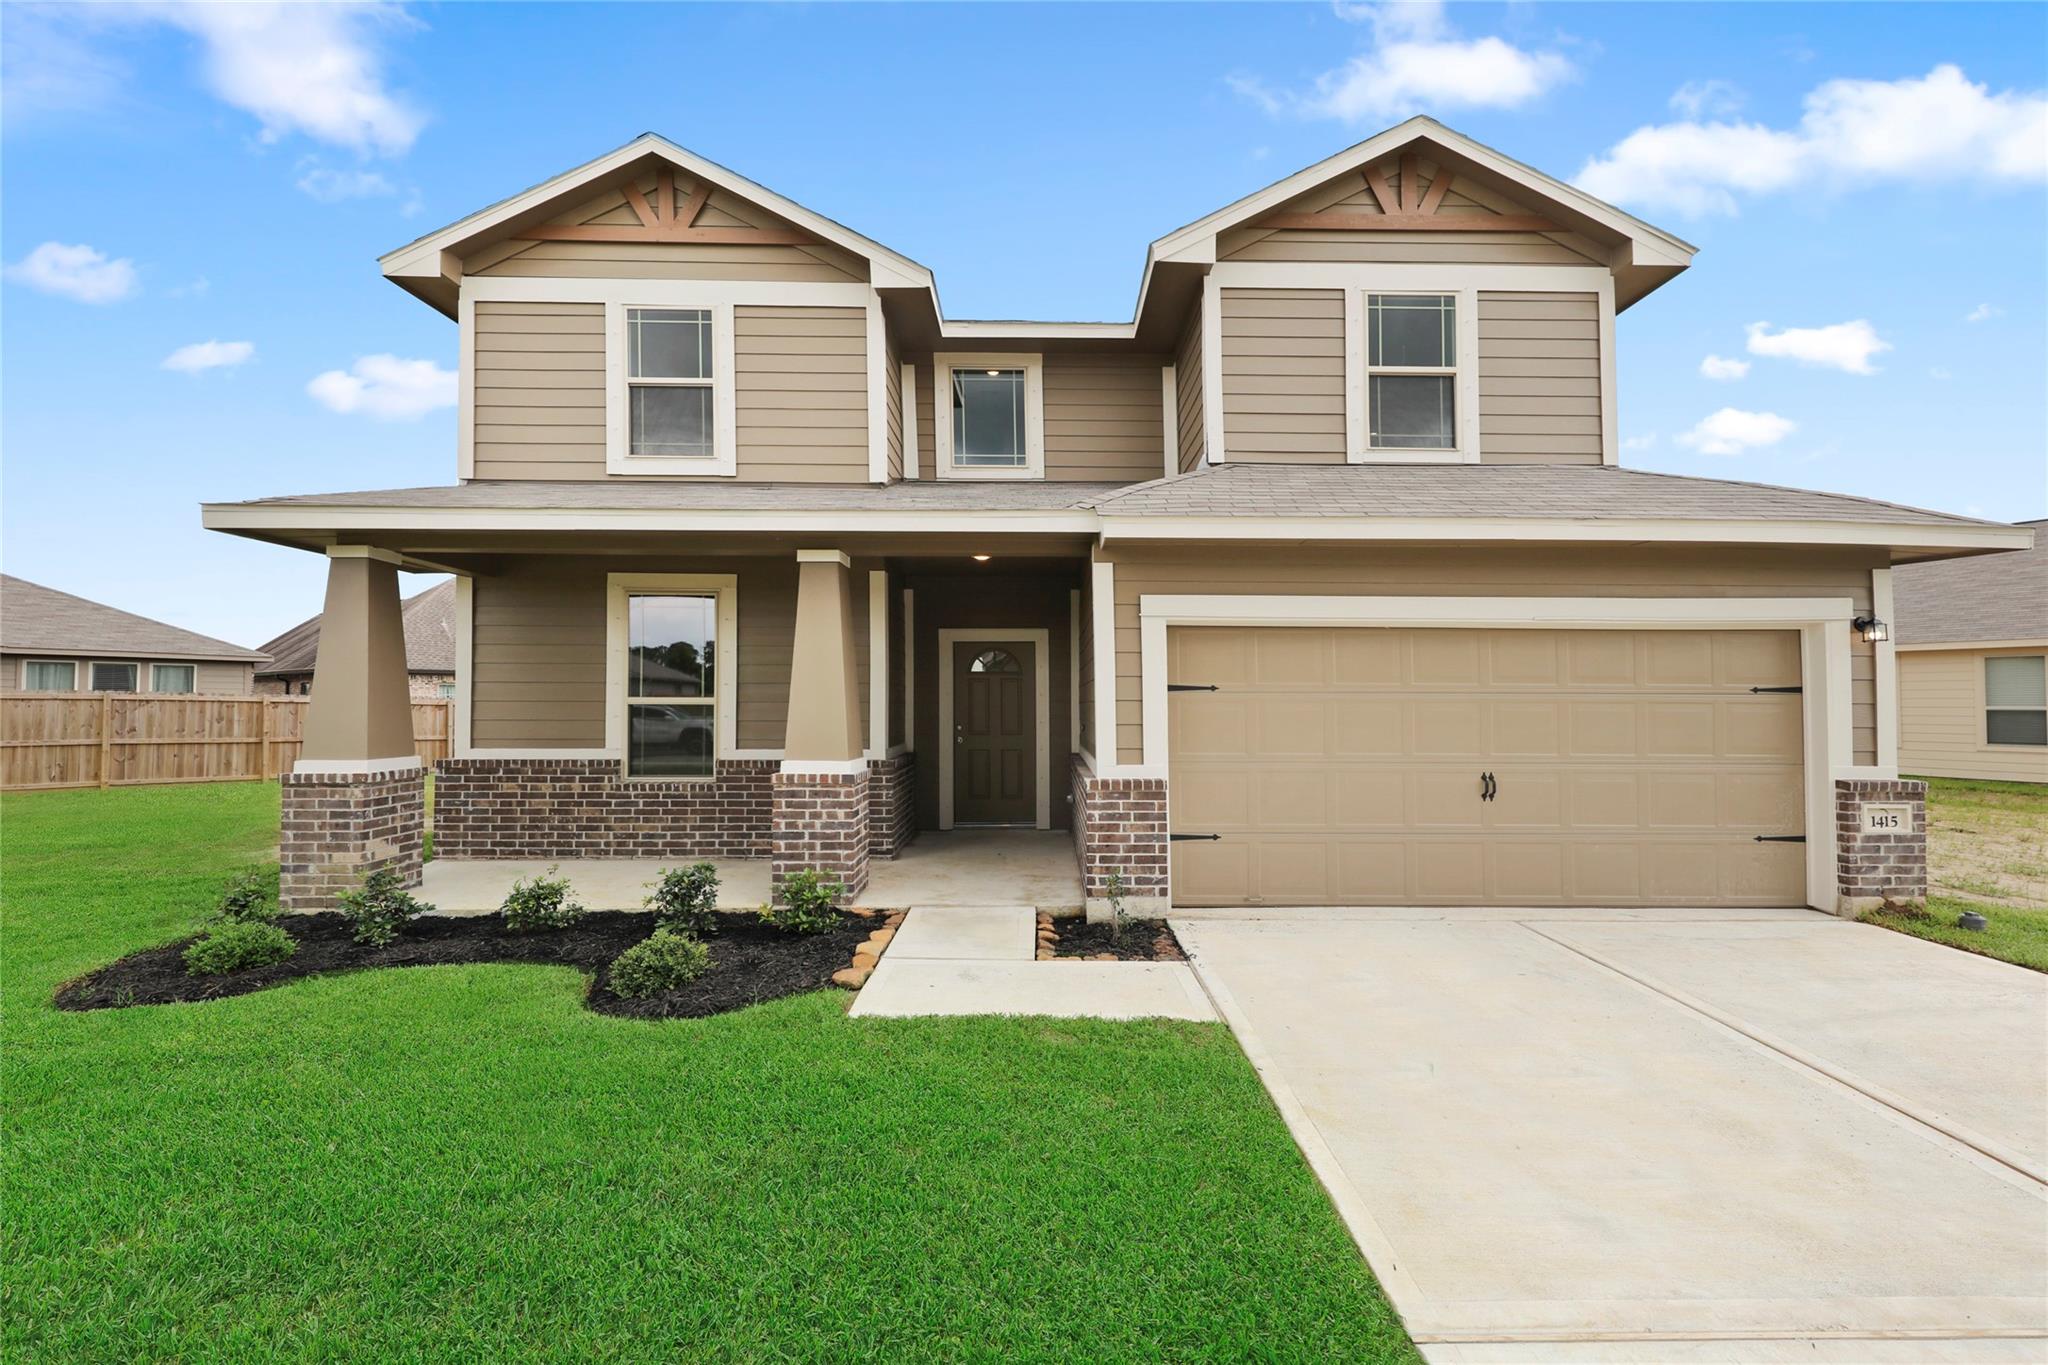 Representative photo. Not actual home. - If you have additional questions regarding 2217 Cedar Valley Drive  in Conroe or would like to tour the property with us call 800-660-1022 and reference MLS# 91292679.